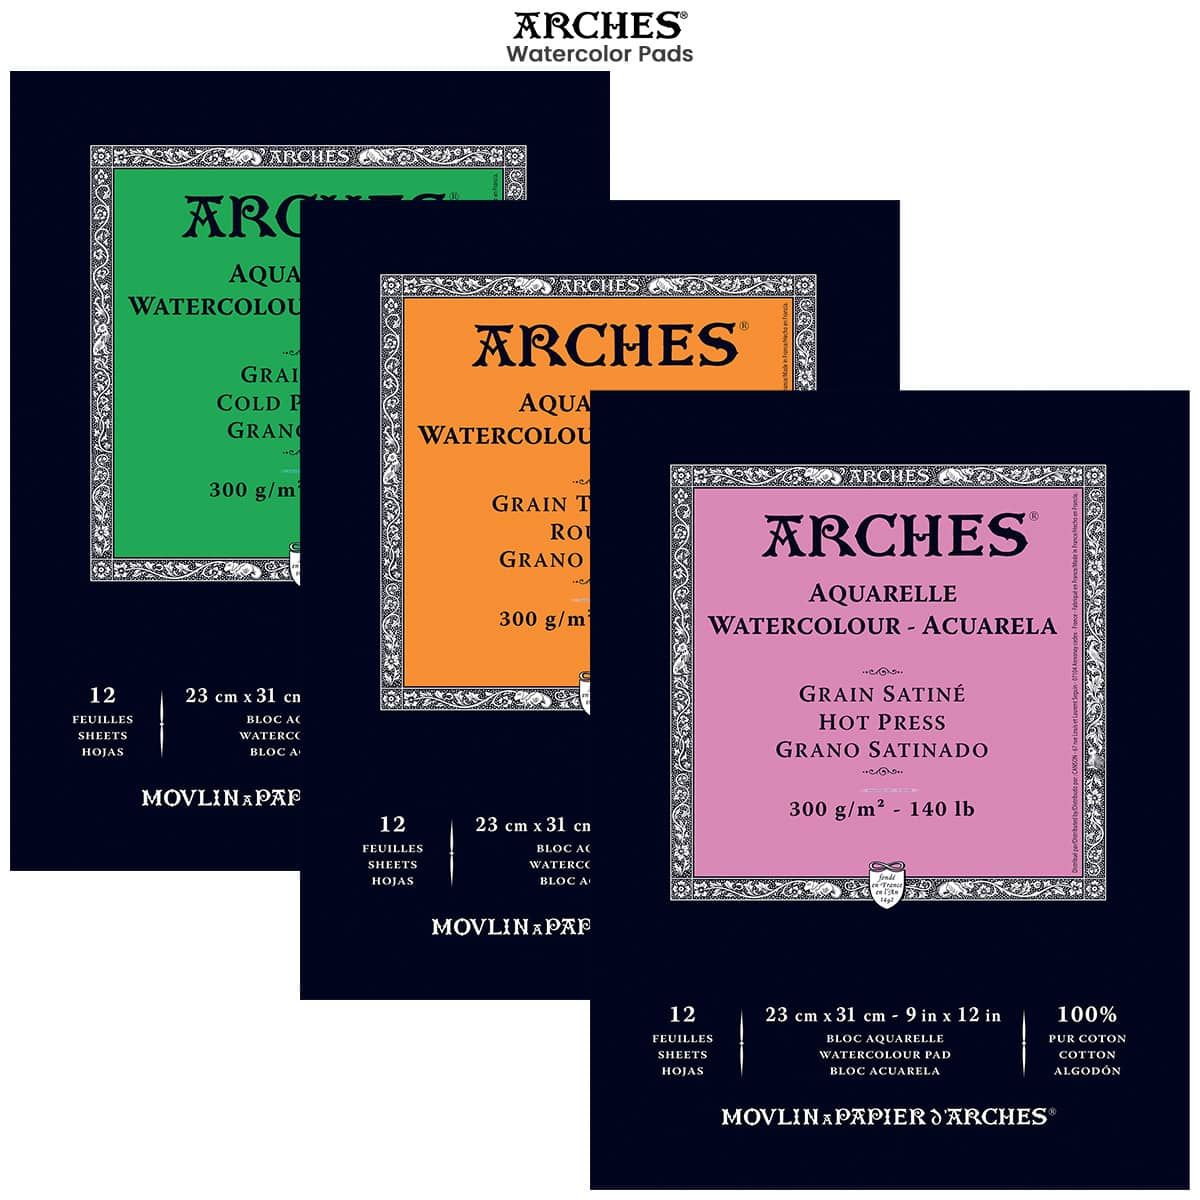 Arches Watercolor Pads 